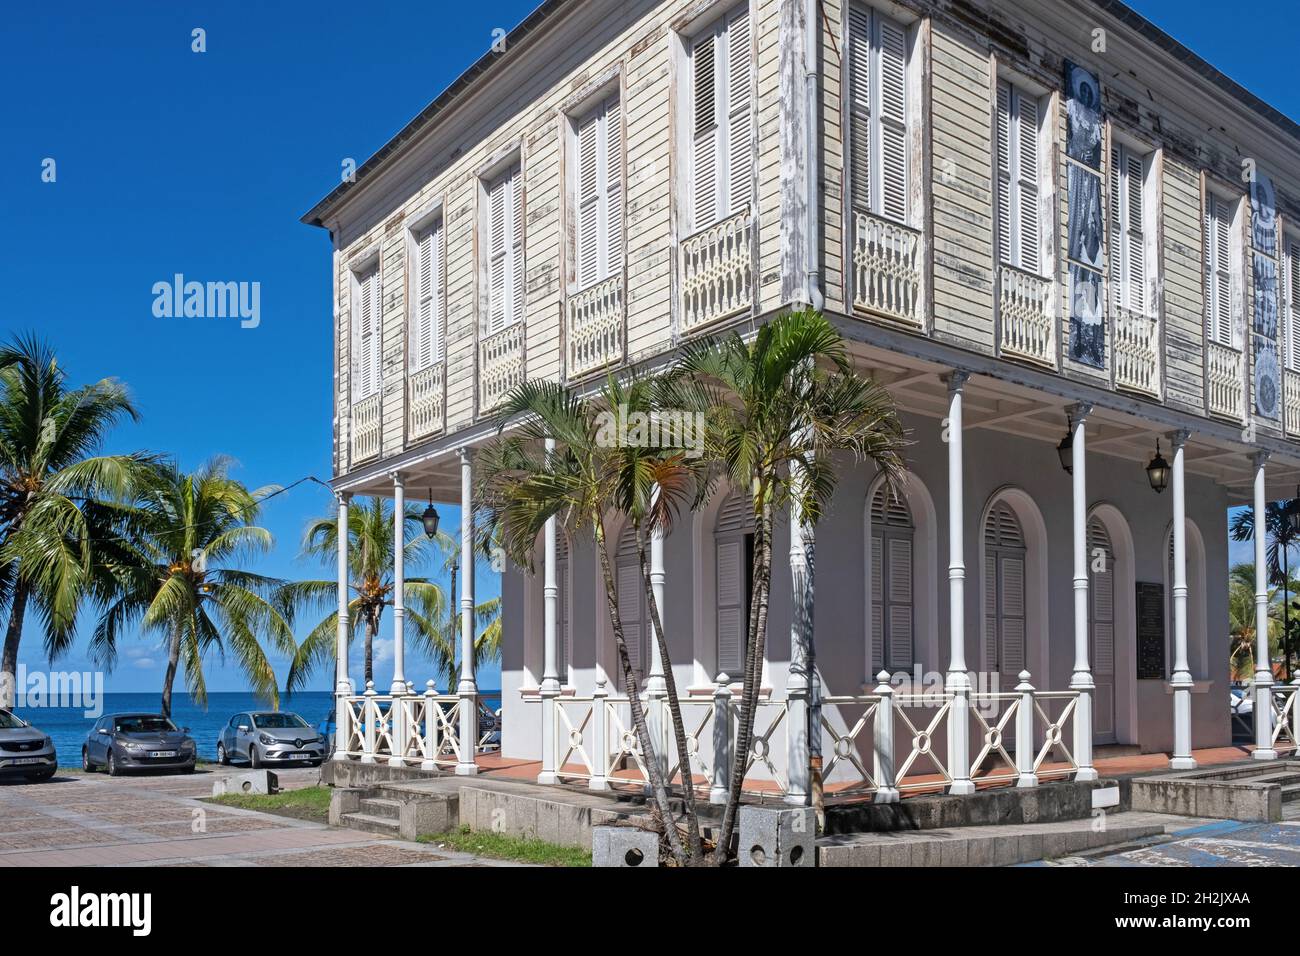 Former Chamber of Commerce in French colonial style at Saint-Pierre, first permanent French colony on the island of Martinique in the Caribbean Sea Stock Photo